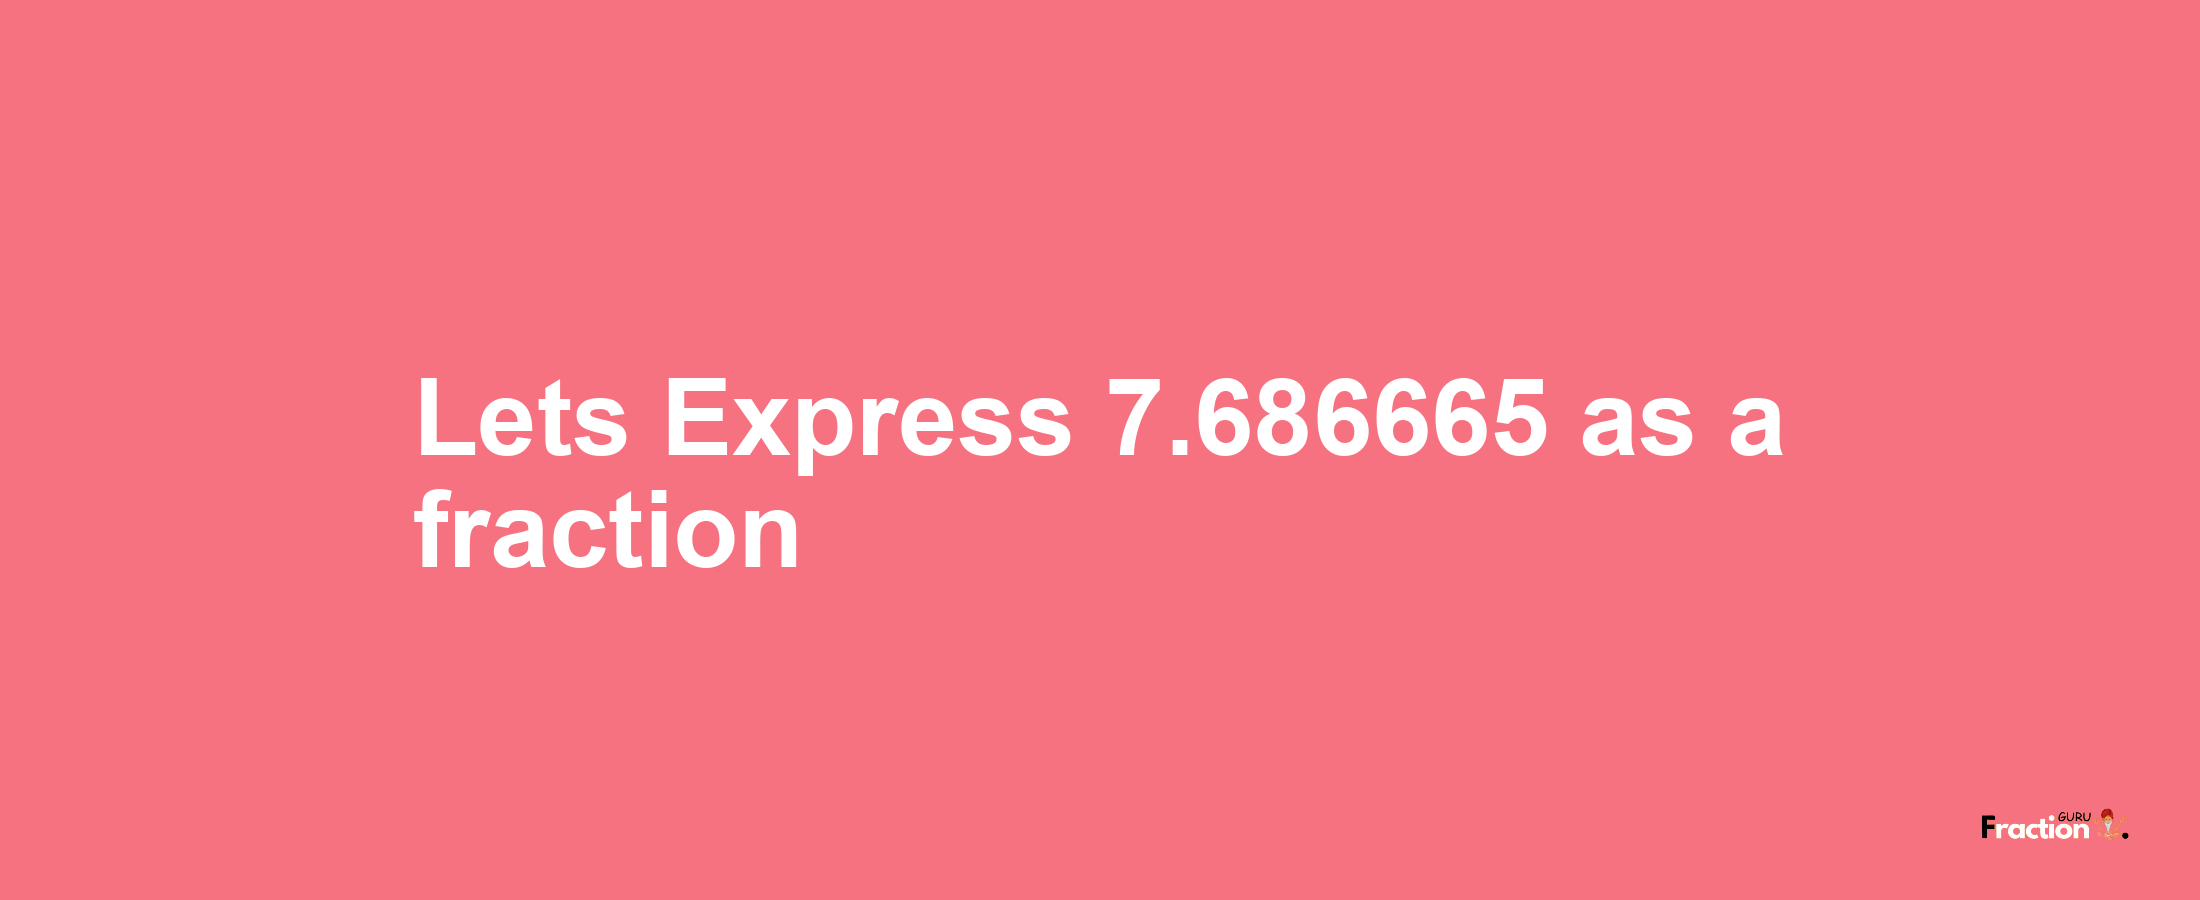 Lets Express 7.686665 as afraction